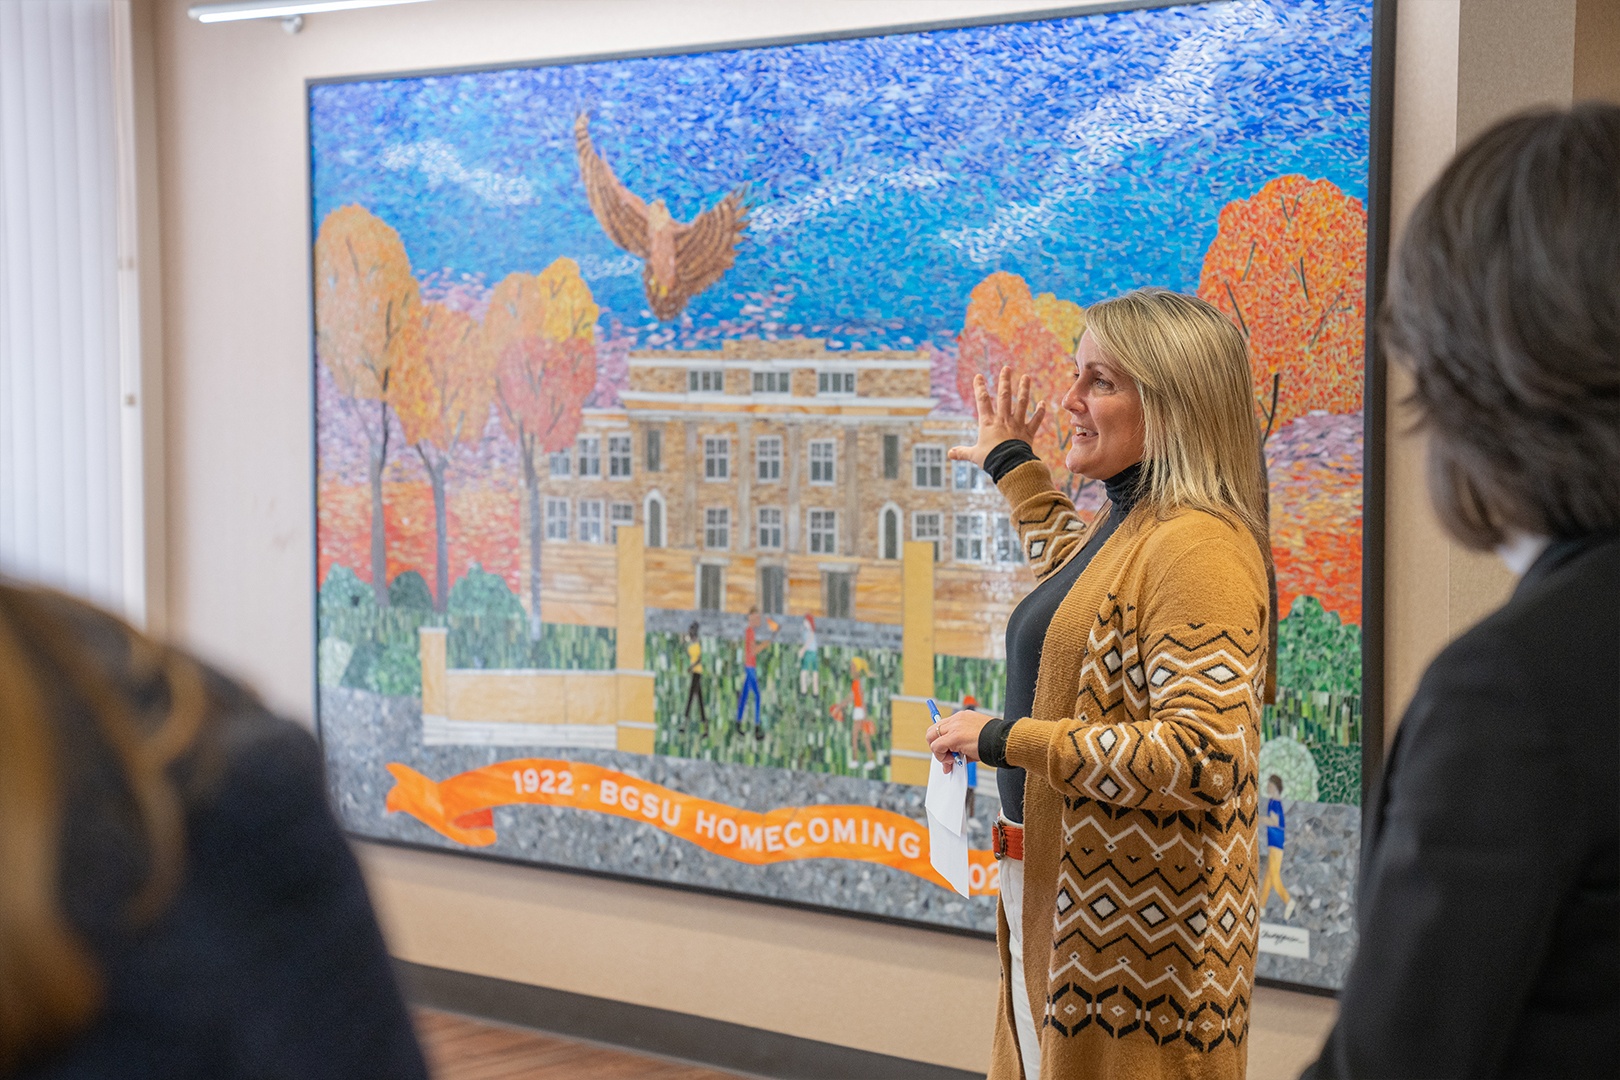 BGSU alumna Sarah Brokamp stands in front of a mosaic artwork depicting University Hall, students, and a falcon